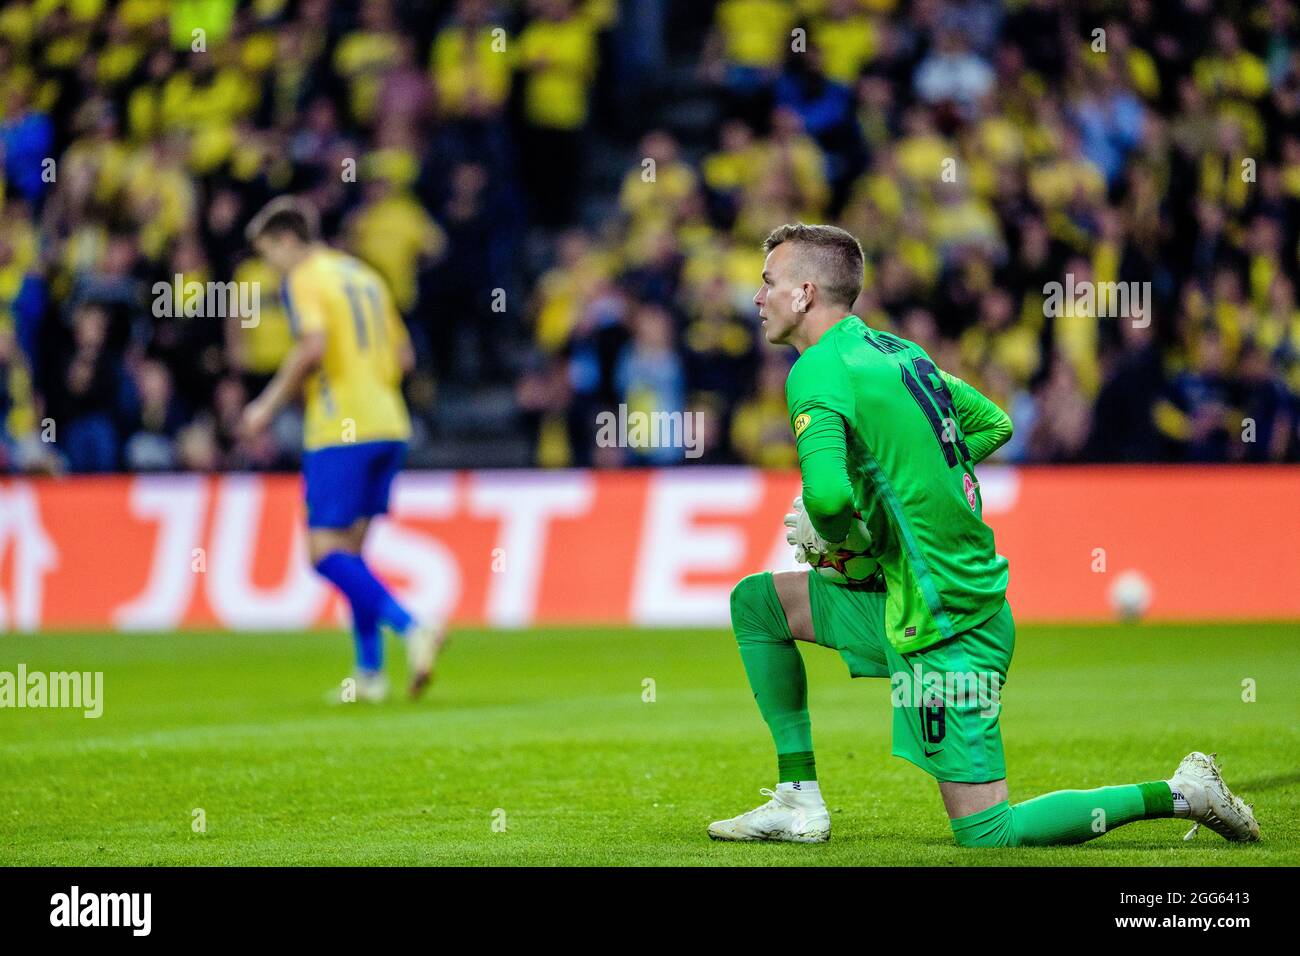 Broendby, Denmark. 25th, August 2021. Goalkeeper Philipp Köhn (18) of FC Red Bull Salzburg seen during the UEFA Champions League qualification match between Broendby IF and FC Red Bull Salzburg at Broendby Stadion in Broendby. (Photo credit: Gonzales Photo - Robert Hendel). Stock Photo